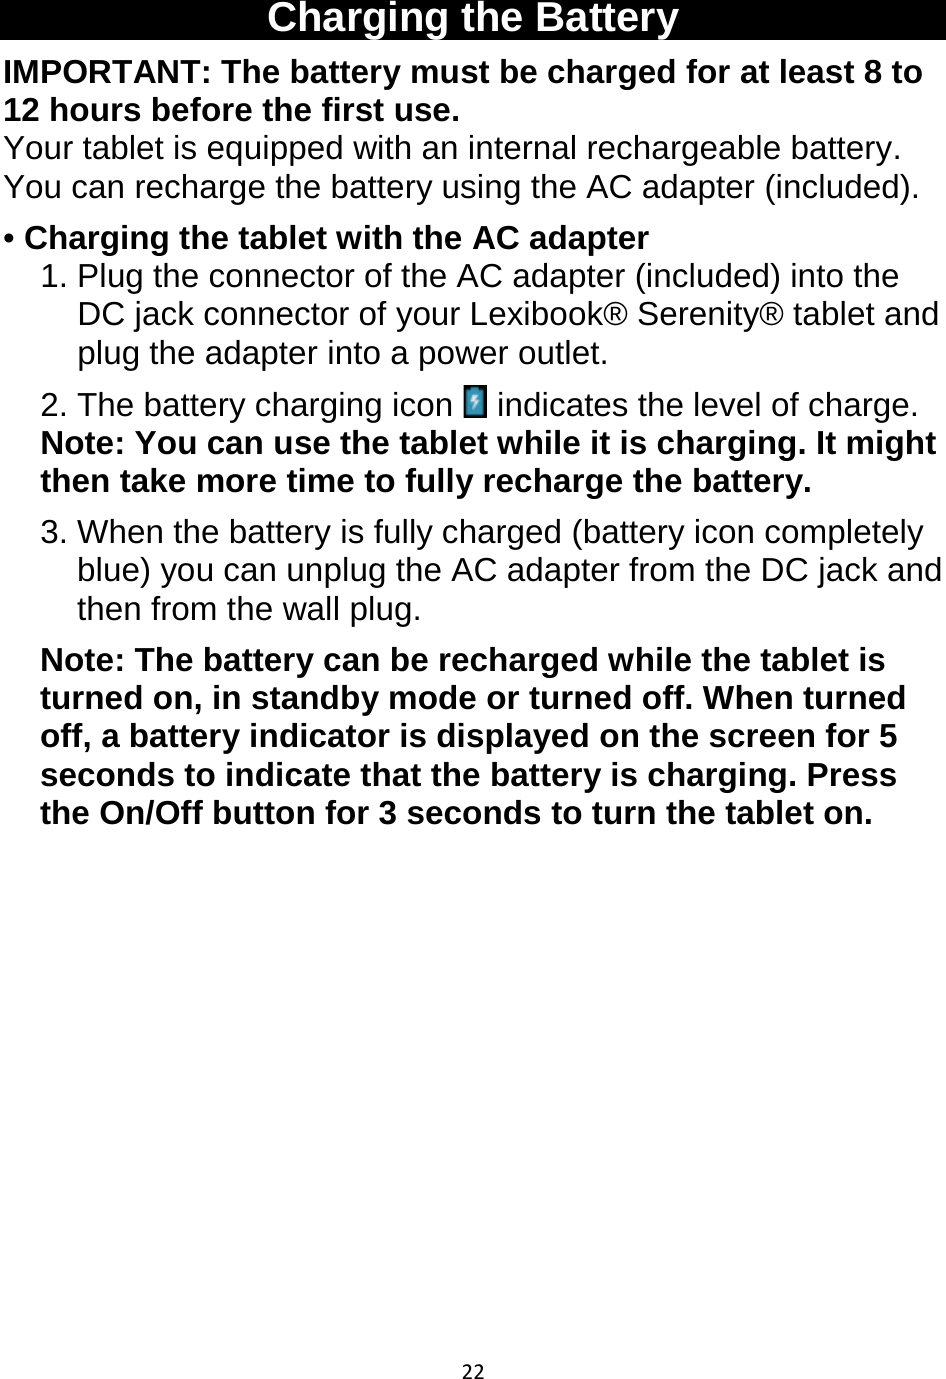 22   Charging the Battery IMPORTANT: The battery must be charged for at least 8 to 12 hours before the first use. Your tablet is equipped with an internal rechargeable battery. You can recharge the battery using the AC adapter (included). • Charging the tablet with the AC adapter 1. Plug the connector of the AC adapter (included) into the DC jack connector of your Lexibook® Serenity® tablet and plug the adapter into a power outlet. 2. The battery charging icon   indicates the level of charge.  Note: You can use the tablet while it is charging. It might then take more time to fully recharge the battery. 3. When the battery is fully charged (battery icon completely blue) you can unplug the AC adapter from the DC jack and then from the wall plug. Note: The battery can be recharged while the tablet is turned on, in standby mode or turned off. When turned off, a battery indicator is displayed on the screen for 5 seconds to indicate that the battery is charging. Press the On/Off button for 3 seconds to turn the tablet on.                